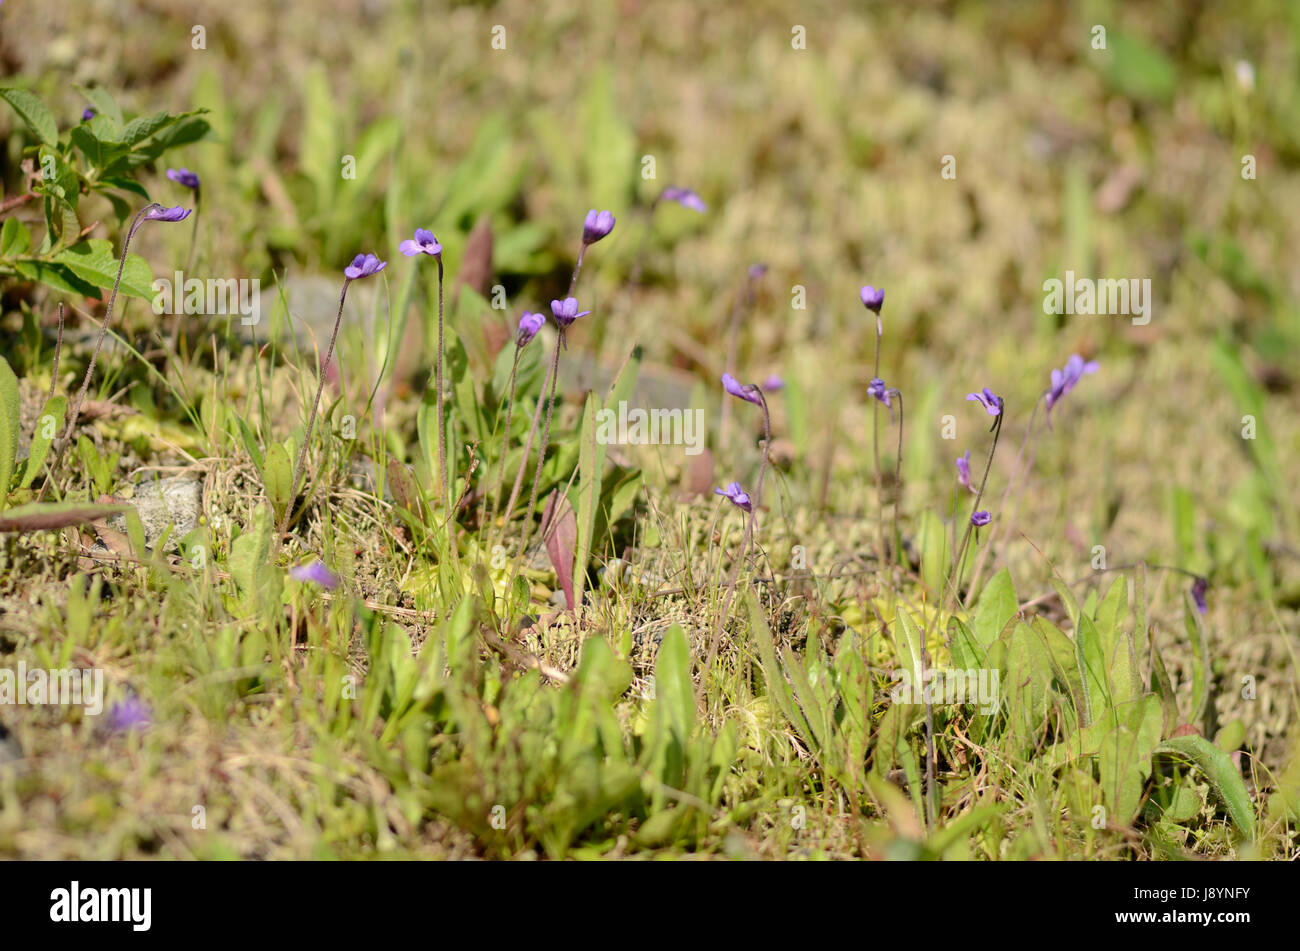 A group of butterworts flowering on a mountain meadow Stock Photo